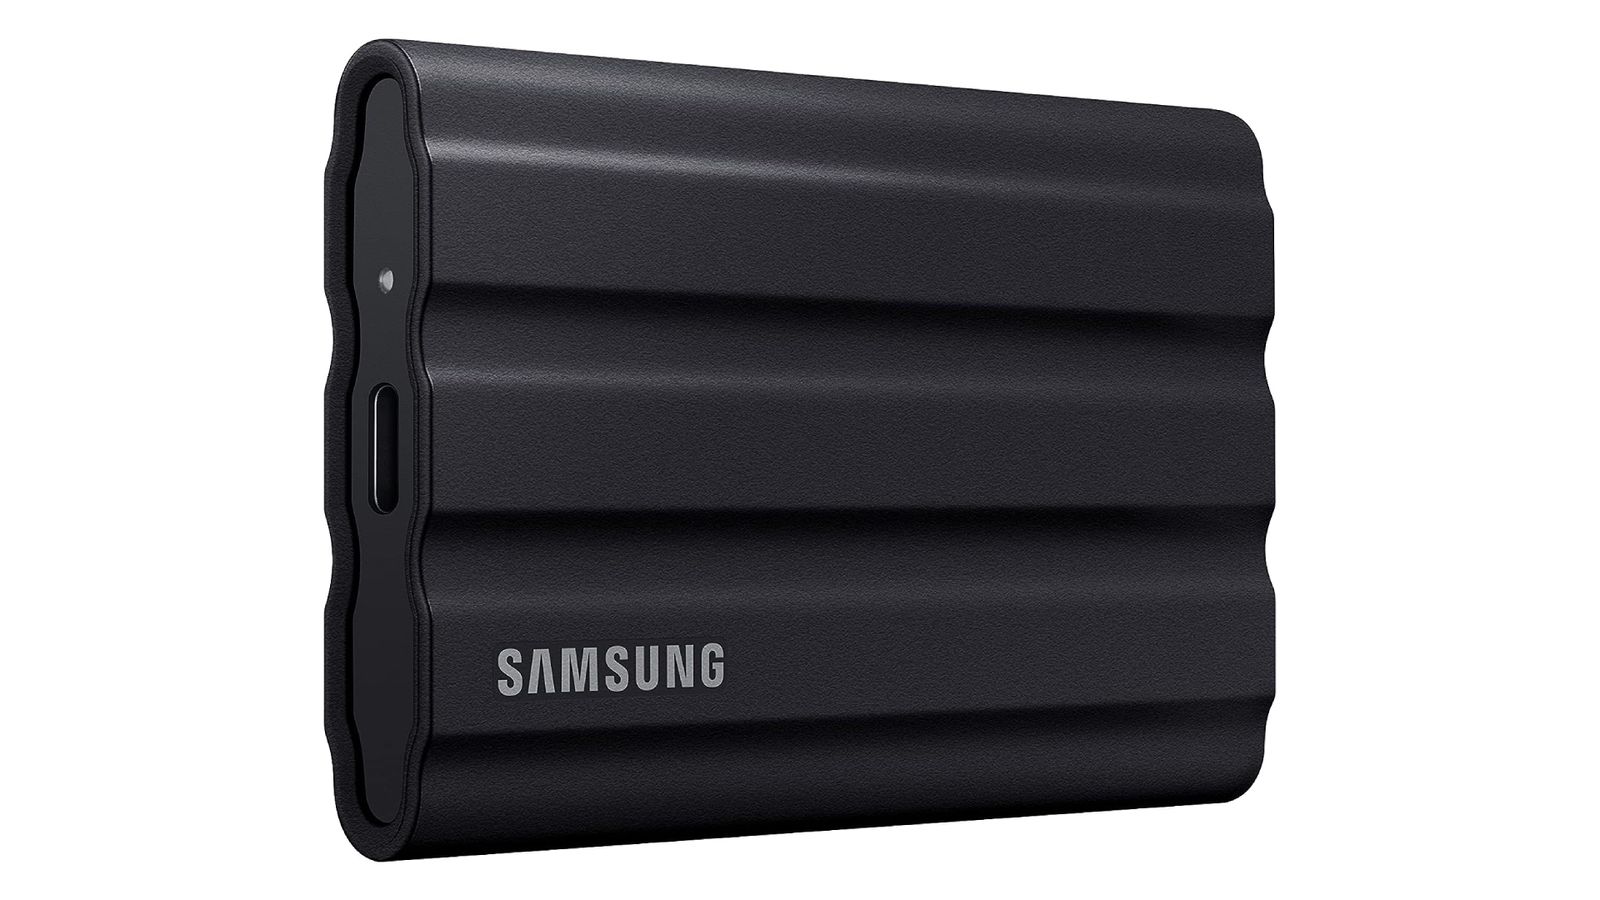 Samsung T7 Shield product image of a black, rectangular hard drive with grey Samsung branding in the corner.